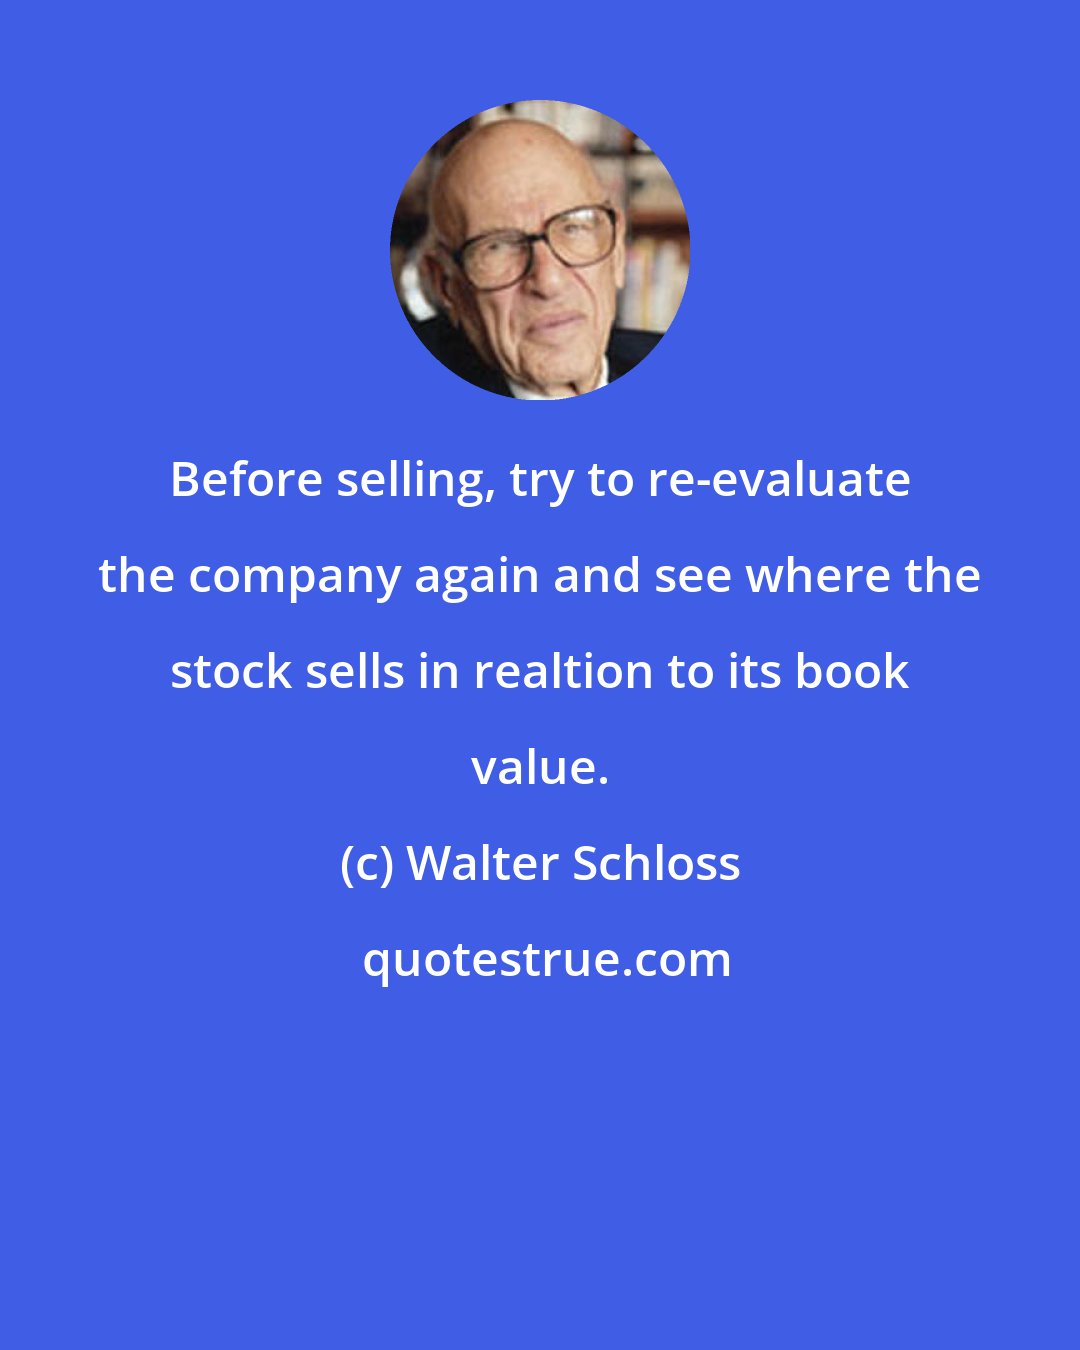 Walter Schloss: Before selling, try to re-evaluate the company again and see where the stock sells in realtion to its book value.